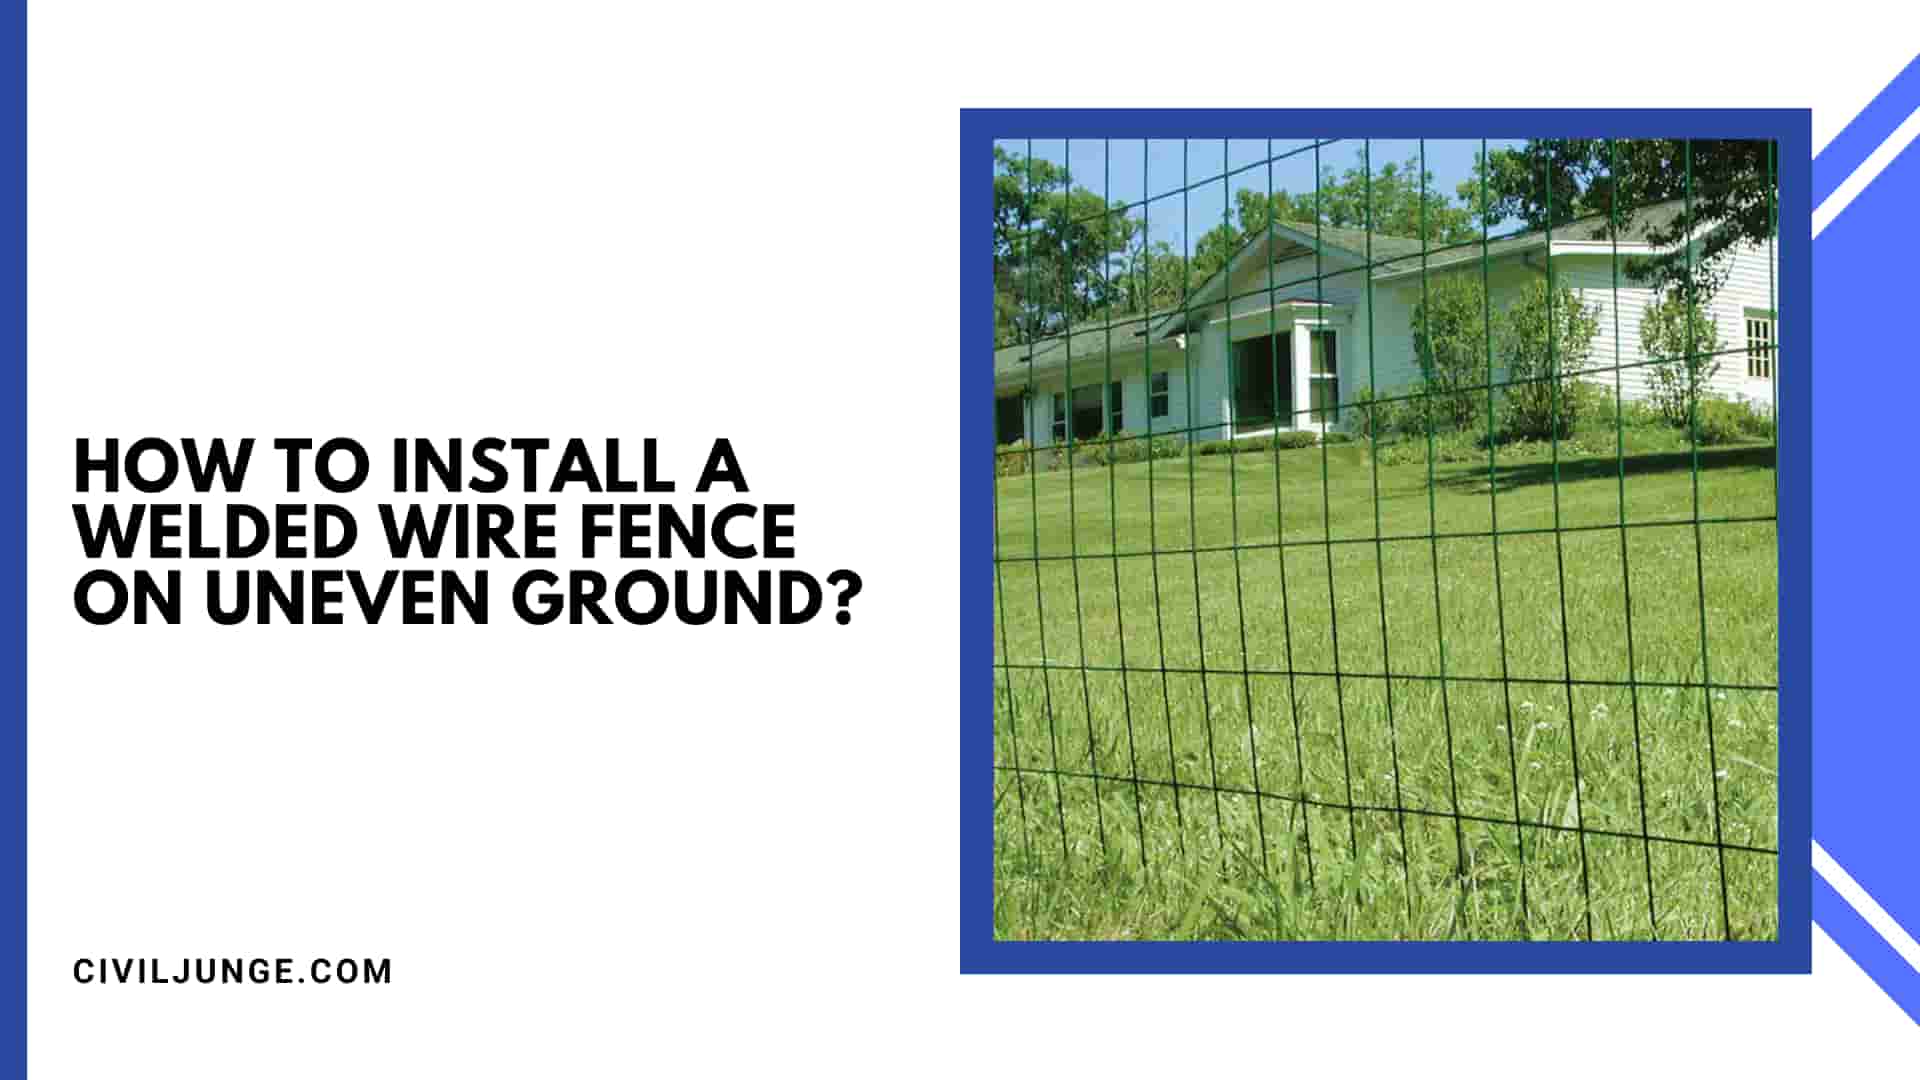 How to Install a Welded Wire Fence on Uneven Ground?